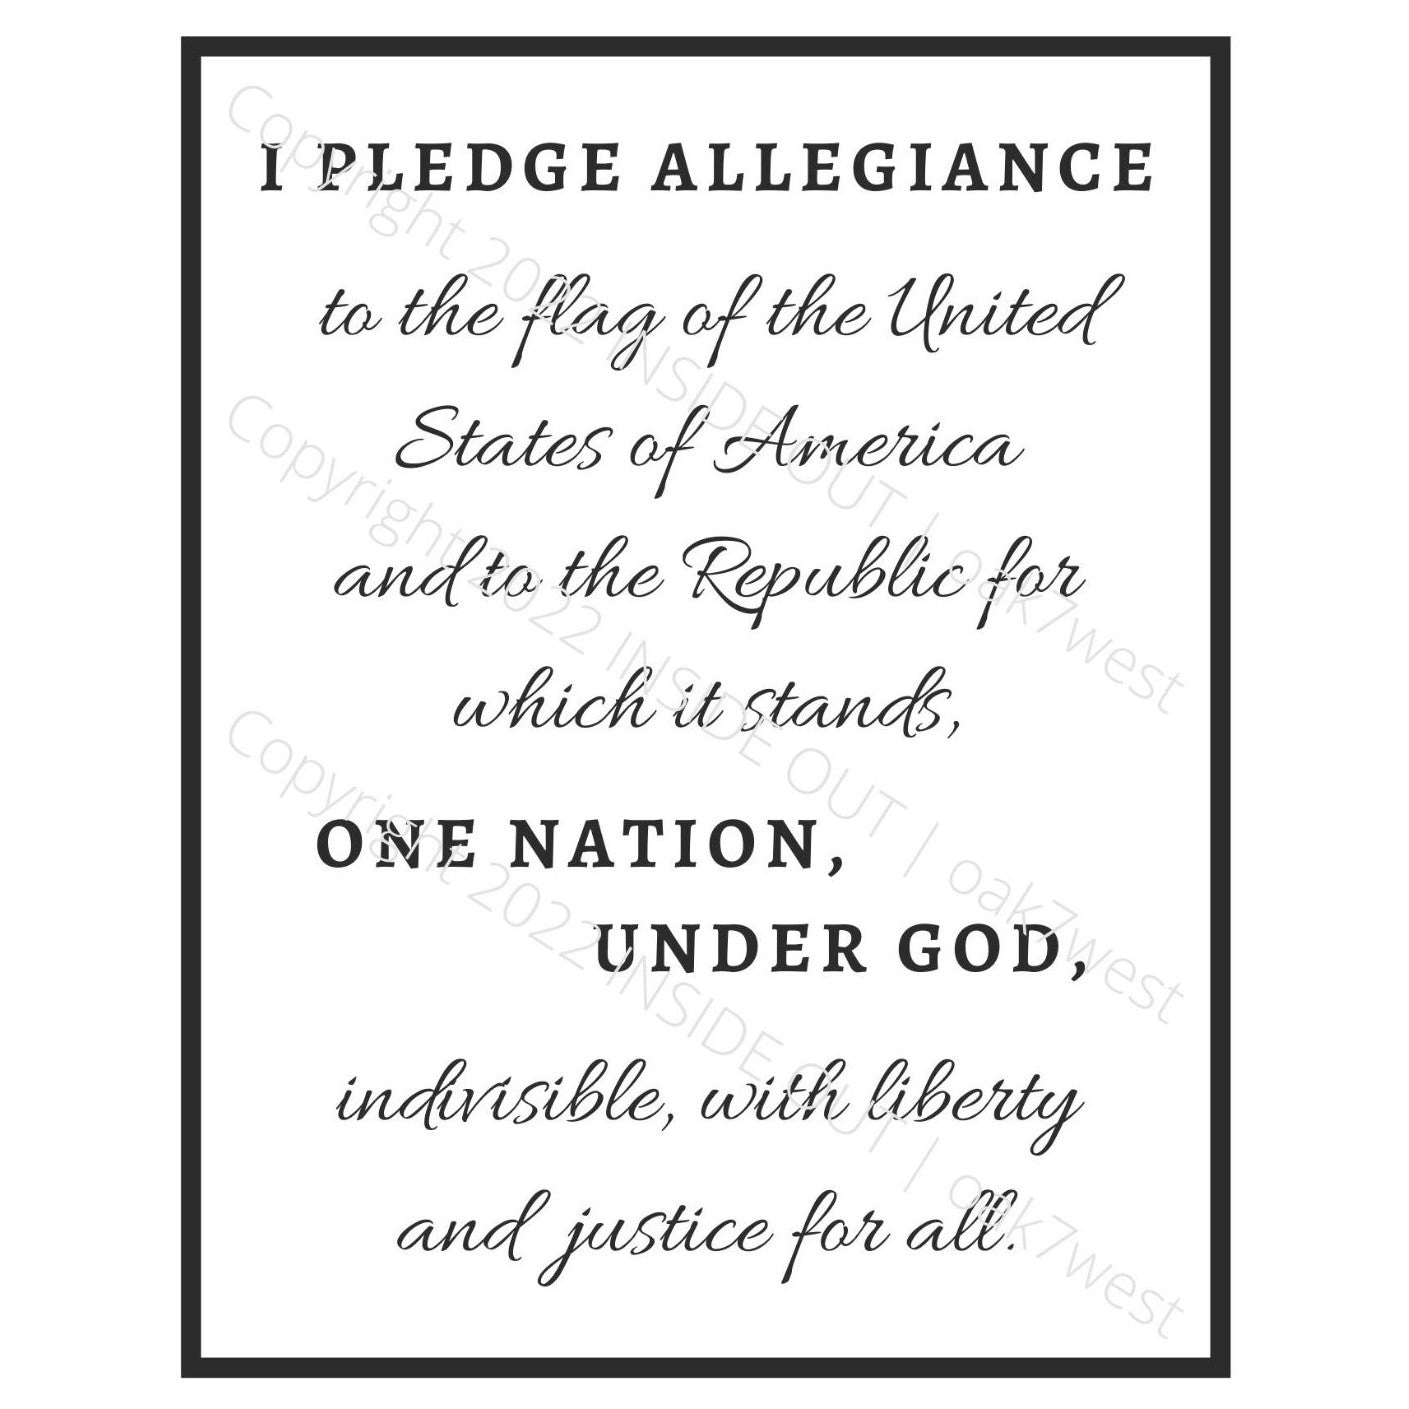 Patriotic Word Art - Pledge of Allegiance (FREE printable download) | The Pledge of Allegiance Word Art Reads... I PLEDGE ALLEGIANCE to the flag of the United States of America and to the Republic for which it stands, ONE NATION, UNDER GOD, indivisible, with liberty and justice for all. | Shown in Black and White with Black Border | oak7west.com